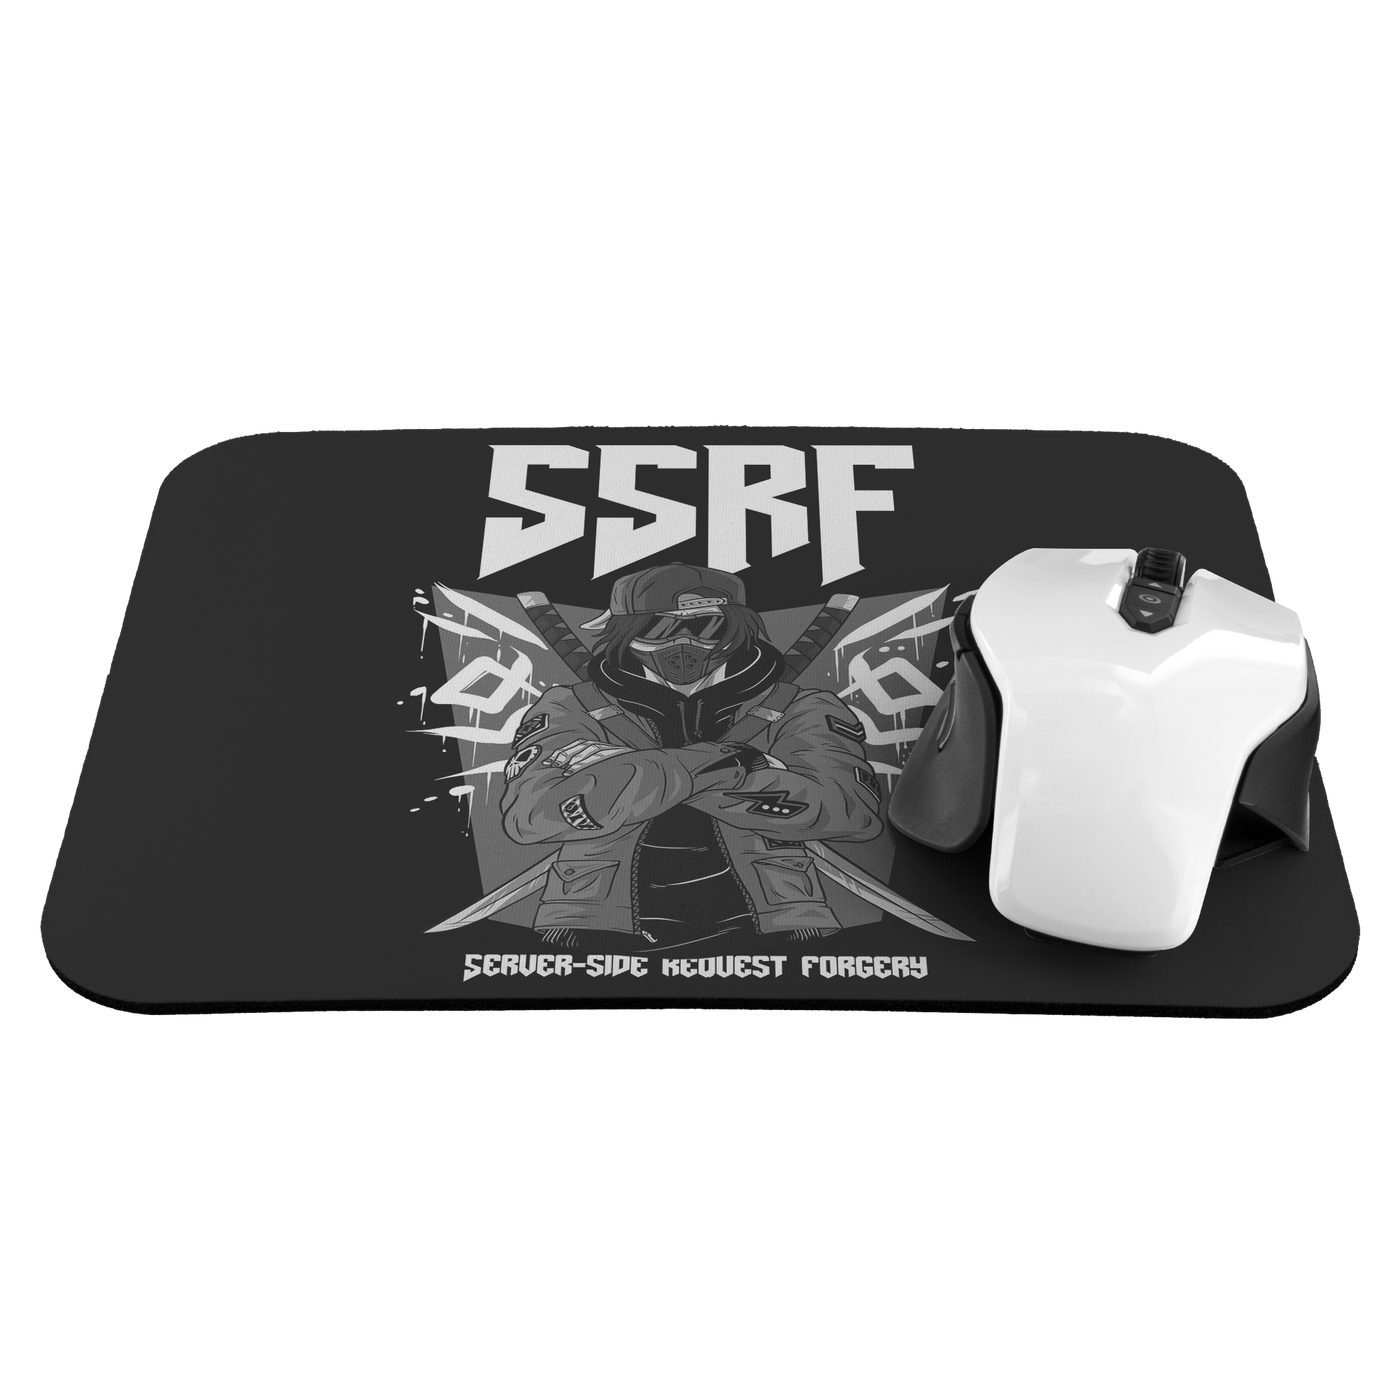 SSRF - Server-side request forgery - Mousepad